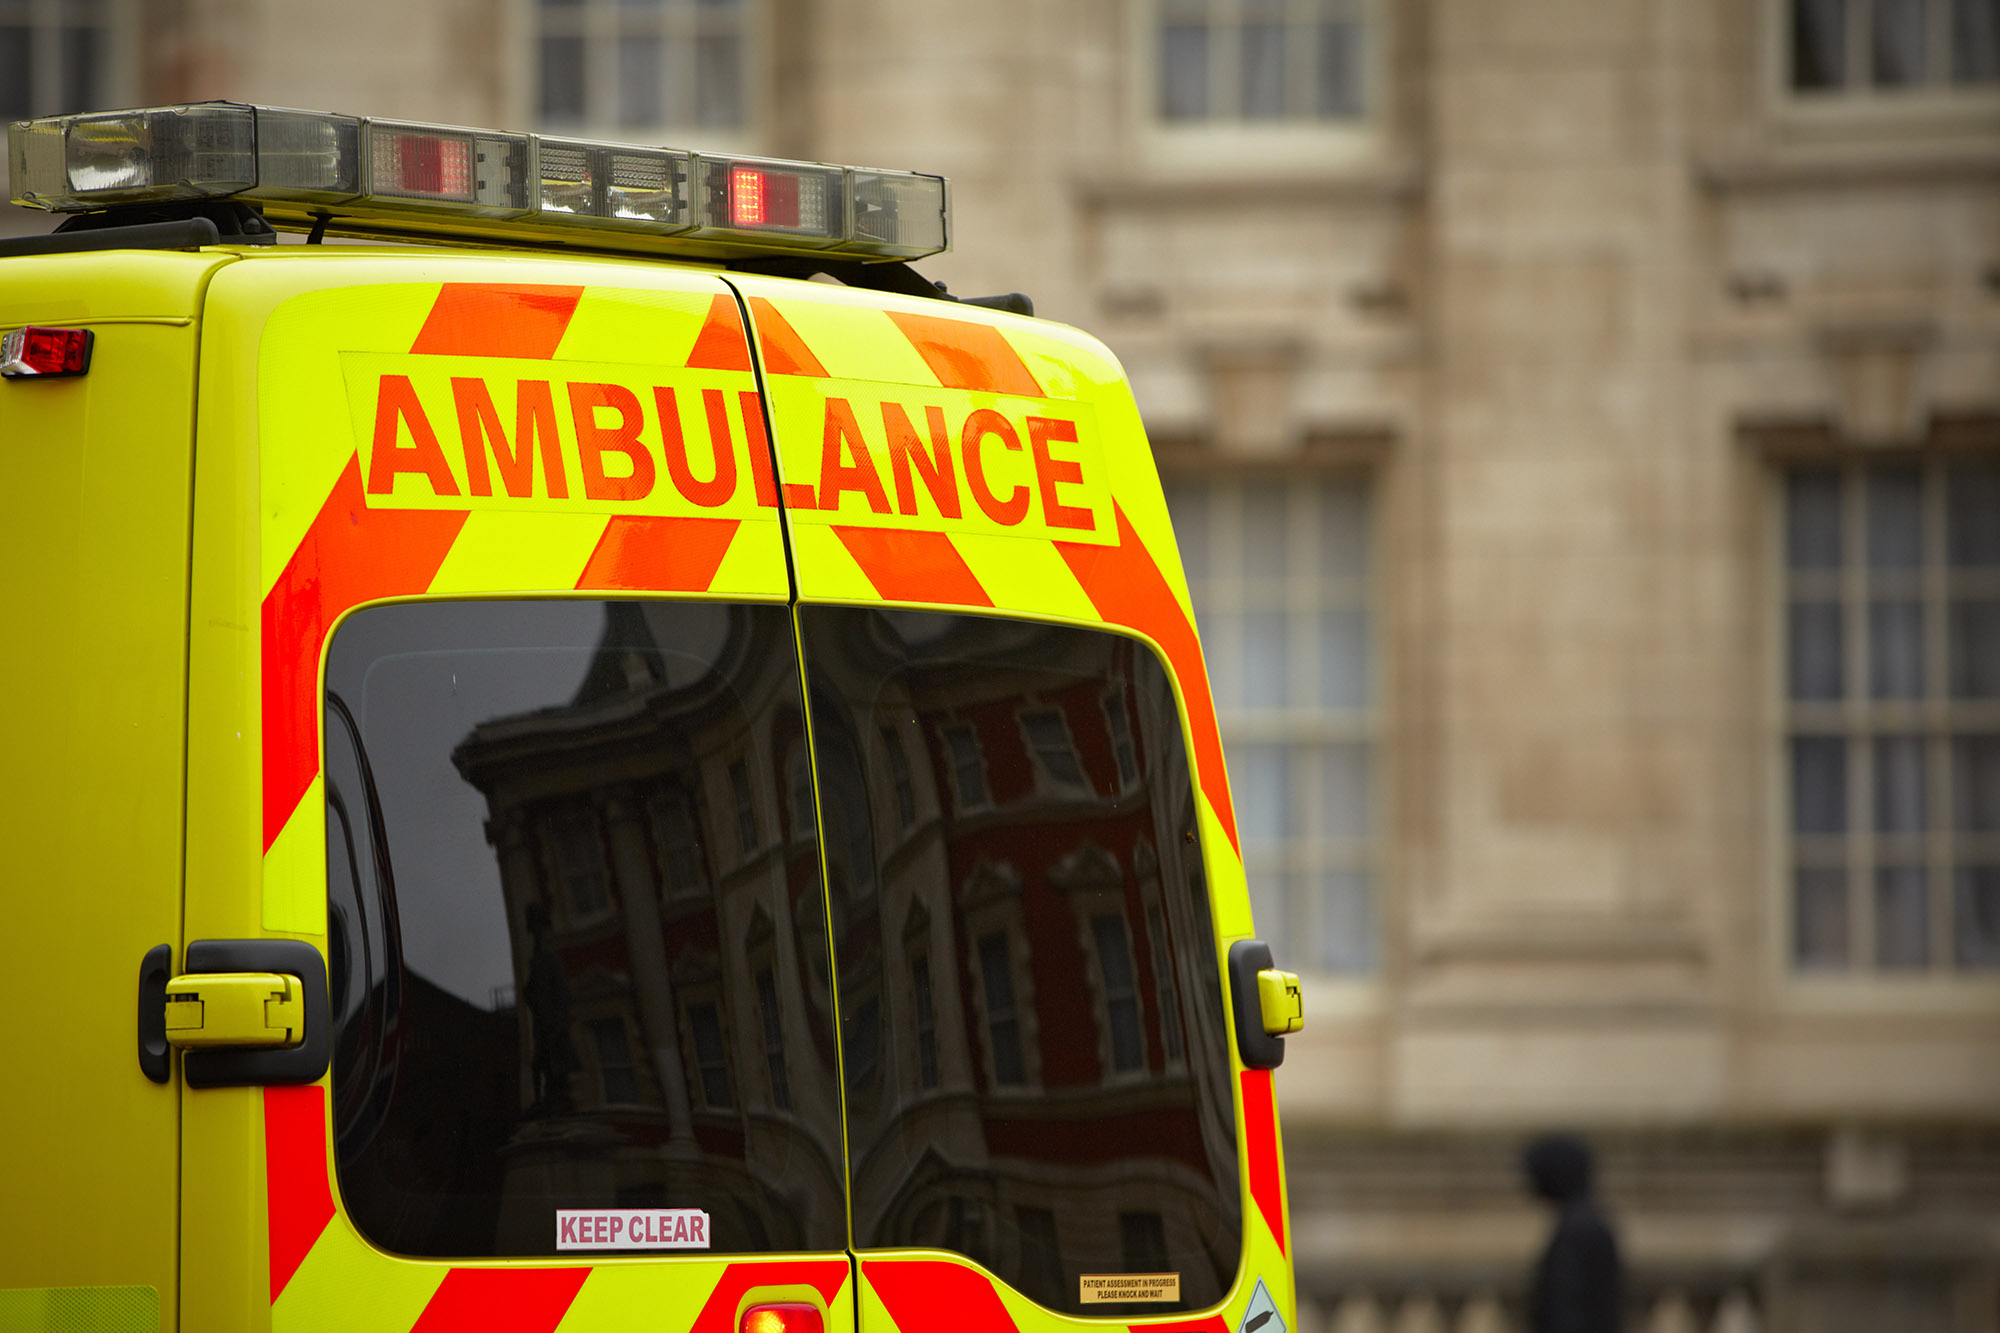 Ambulance, personal injury solicitors Glasgow, accident claim solicitors Glasgow